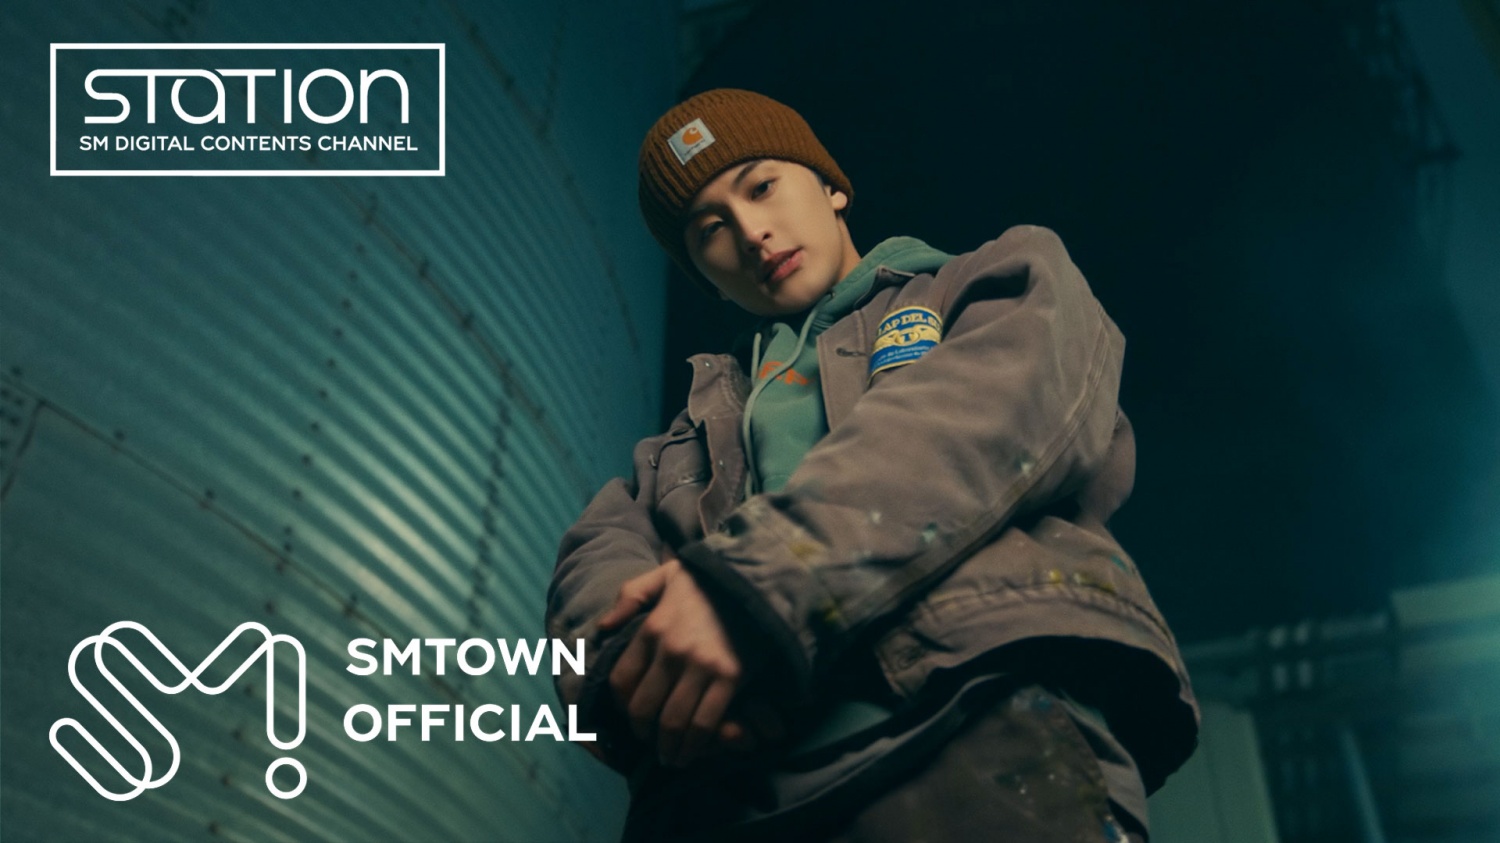 NCT MARK, first solo song 'Child' ranked 1st in Gaon downloads